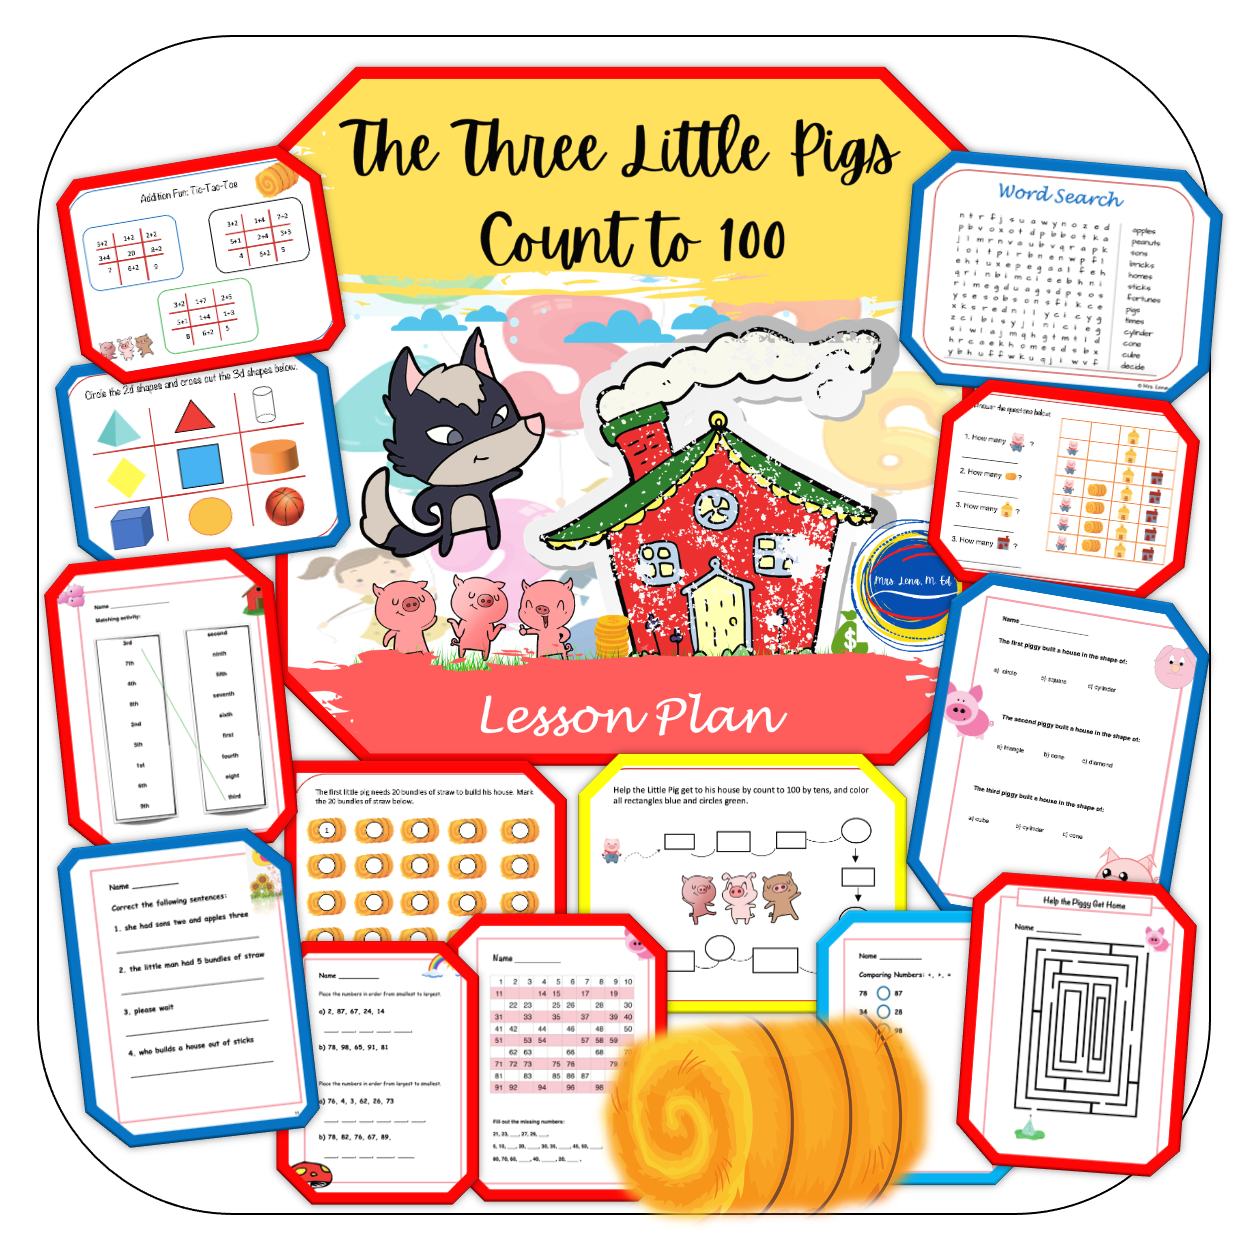 The Three Little Pigs Count to 100 Hundred Days of School Lesson Plan and Activities 